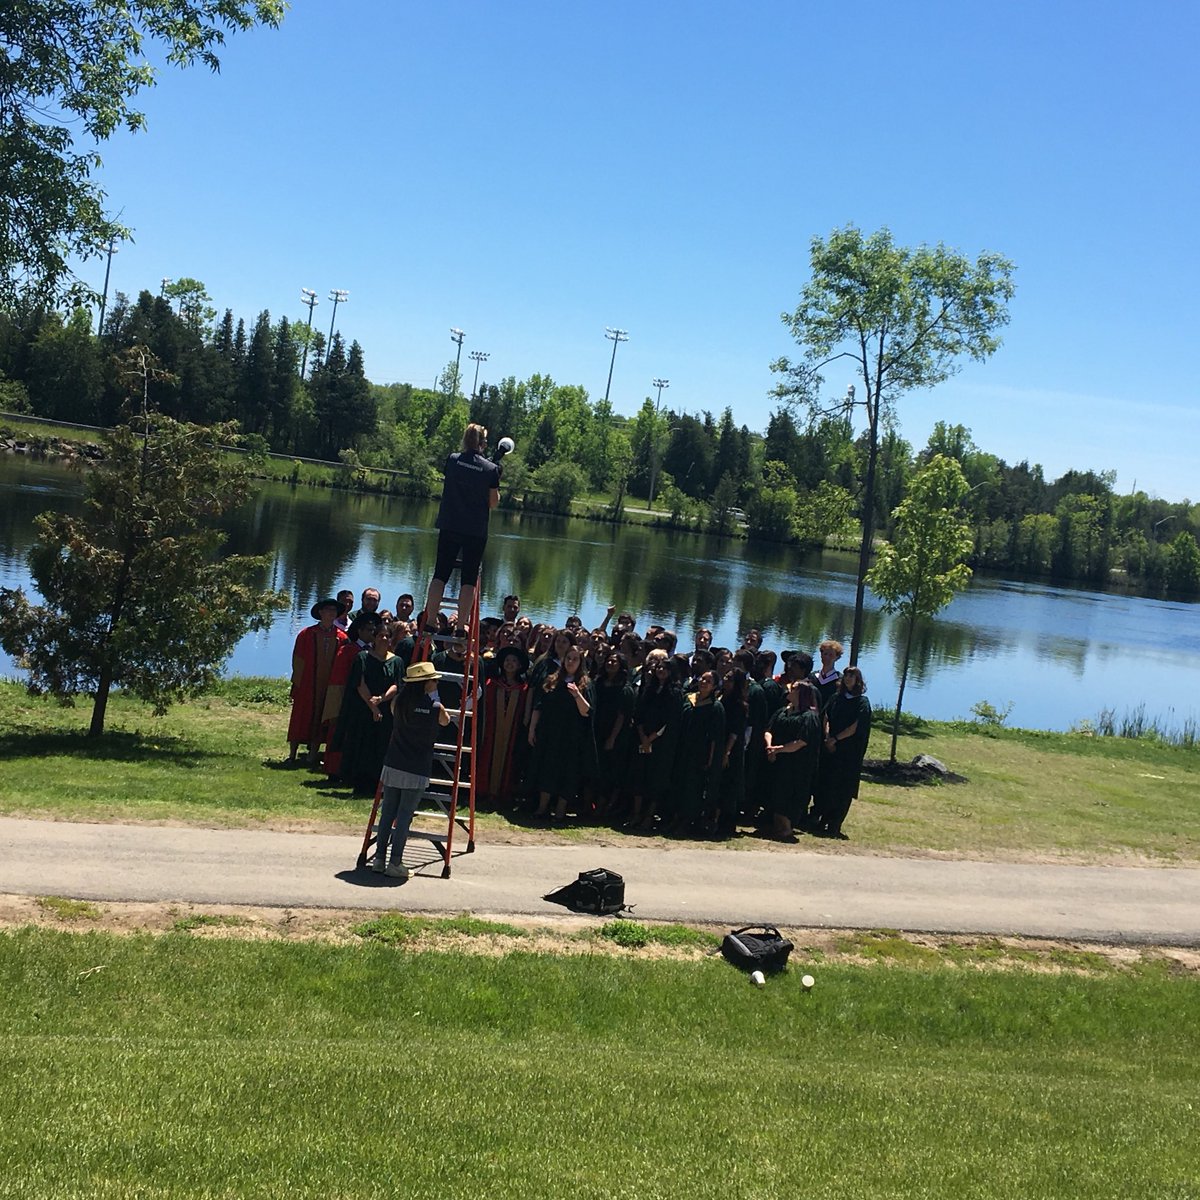 Congratulations to our M.A and Ph. D graduates today @TrentConvo. What a spectacular day to celebrate your hard work. Here is a behind the scenes of our group shot.